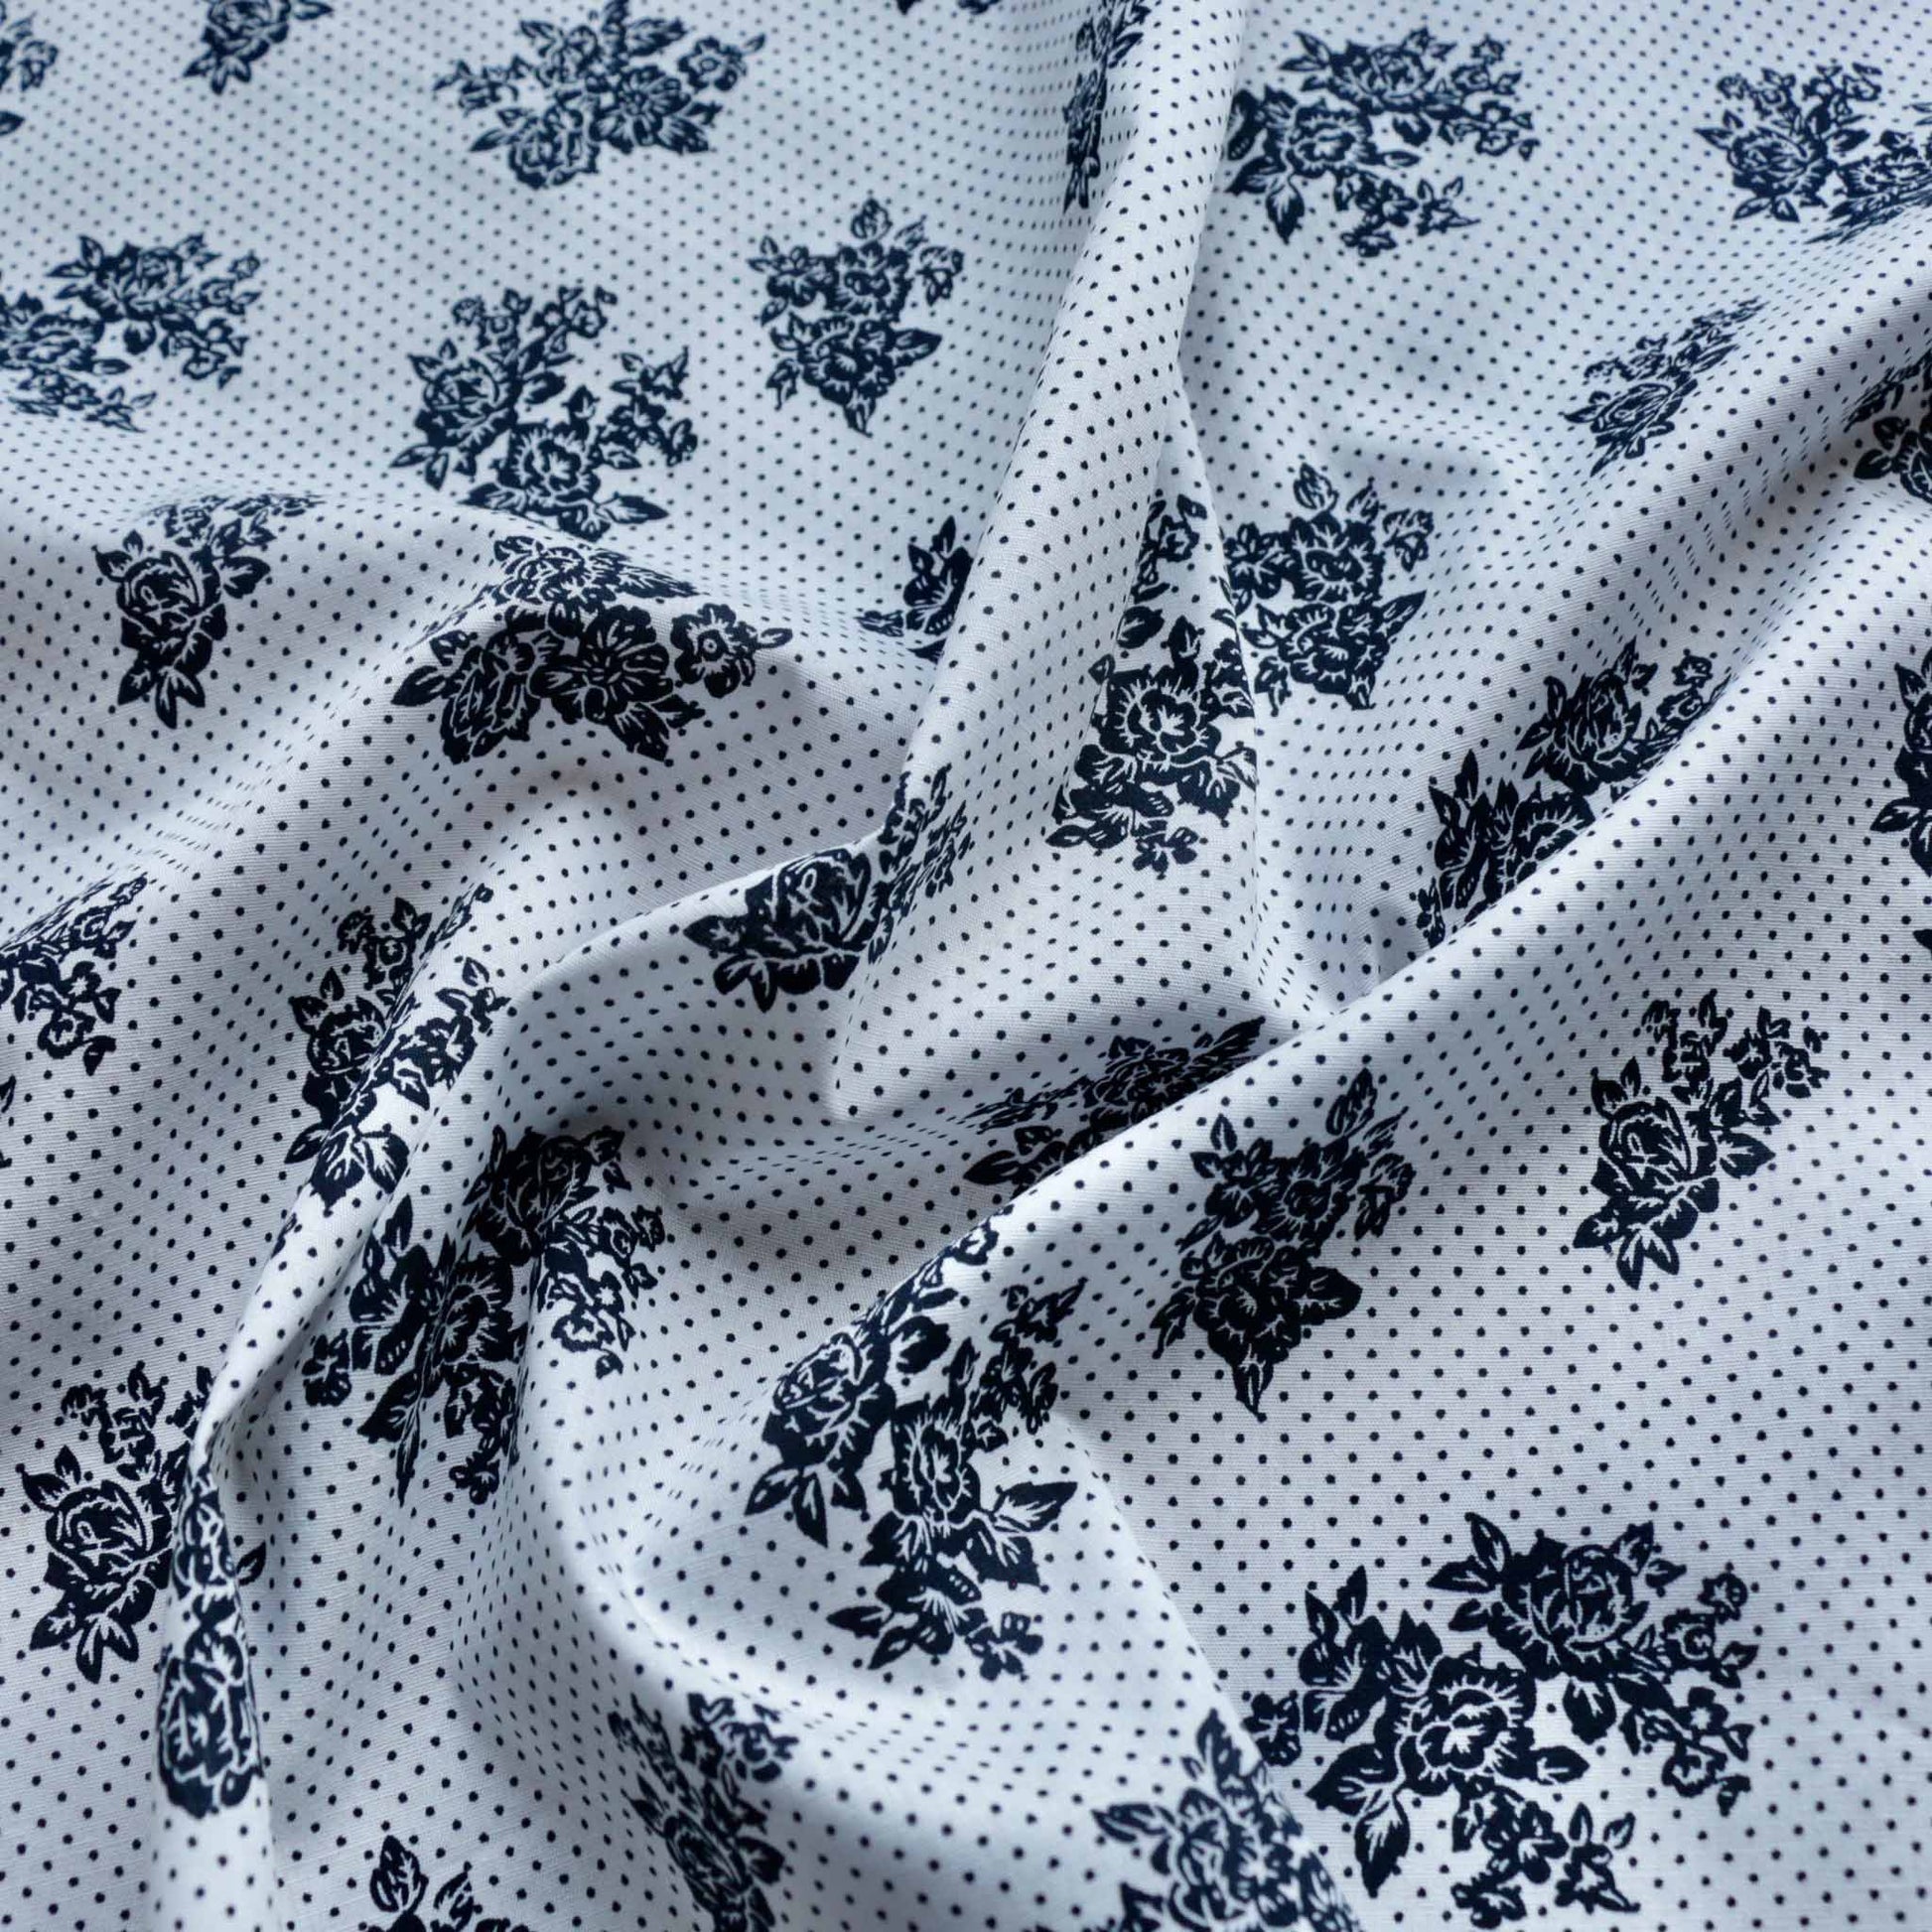 white cotton dressmaking fabric with navy dots and floral pattern